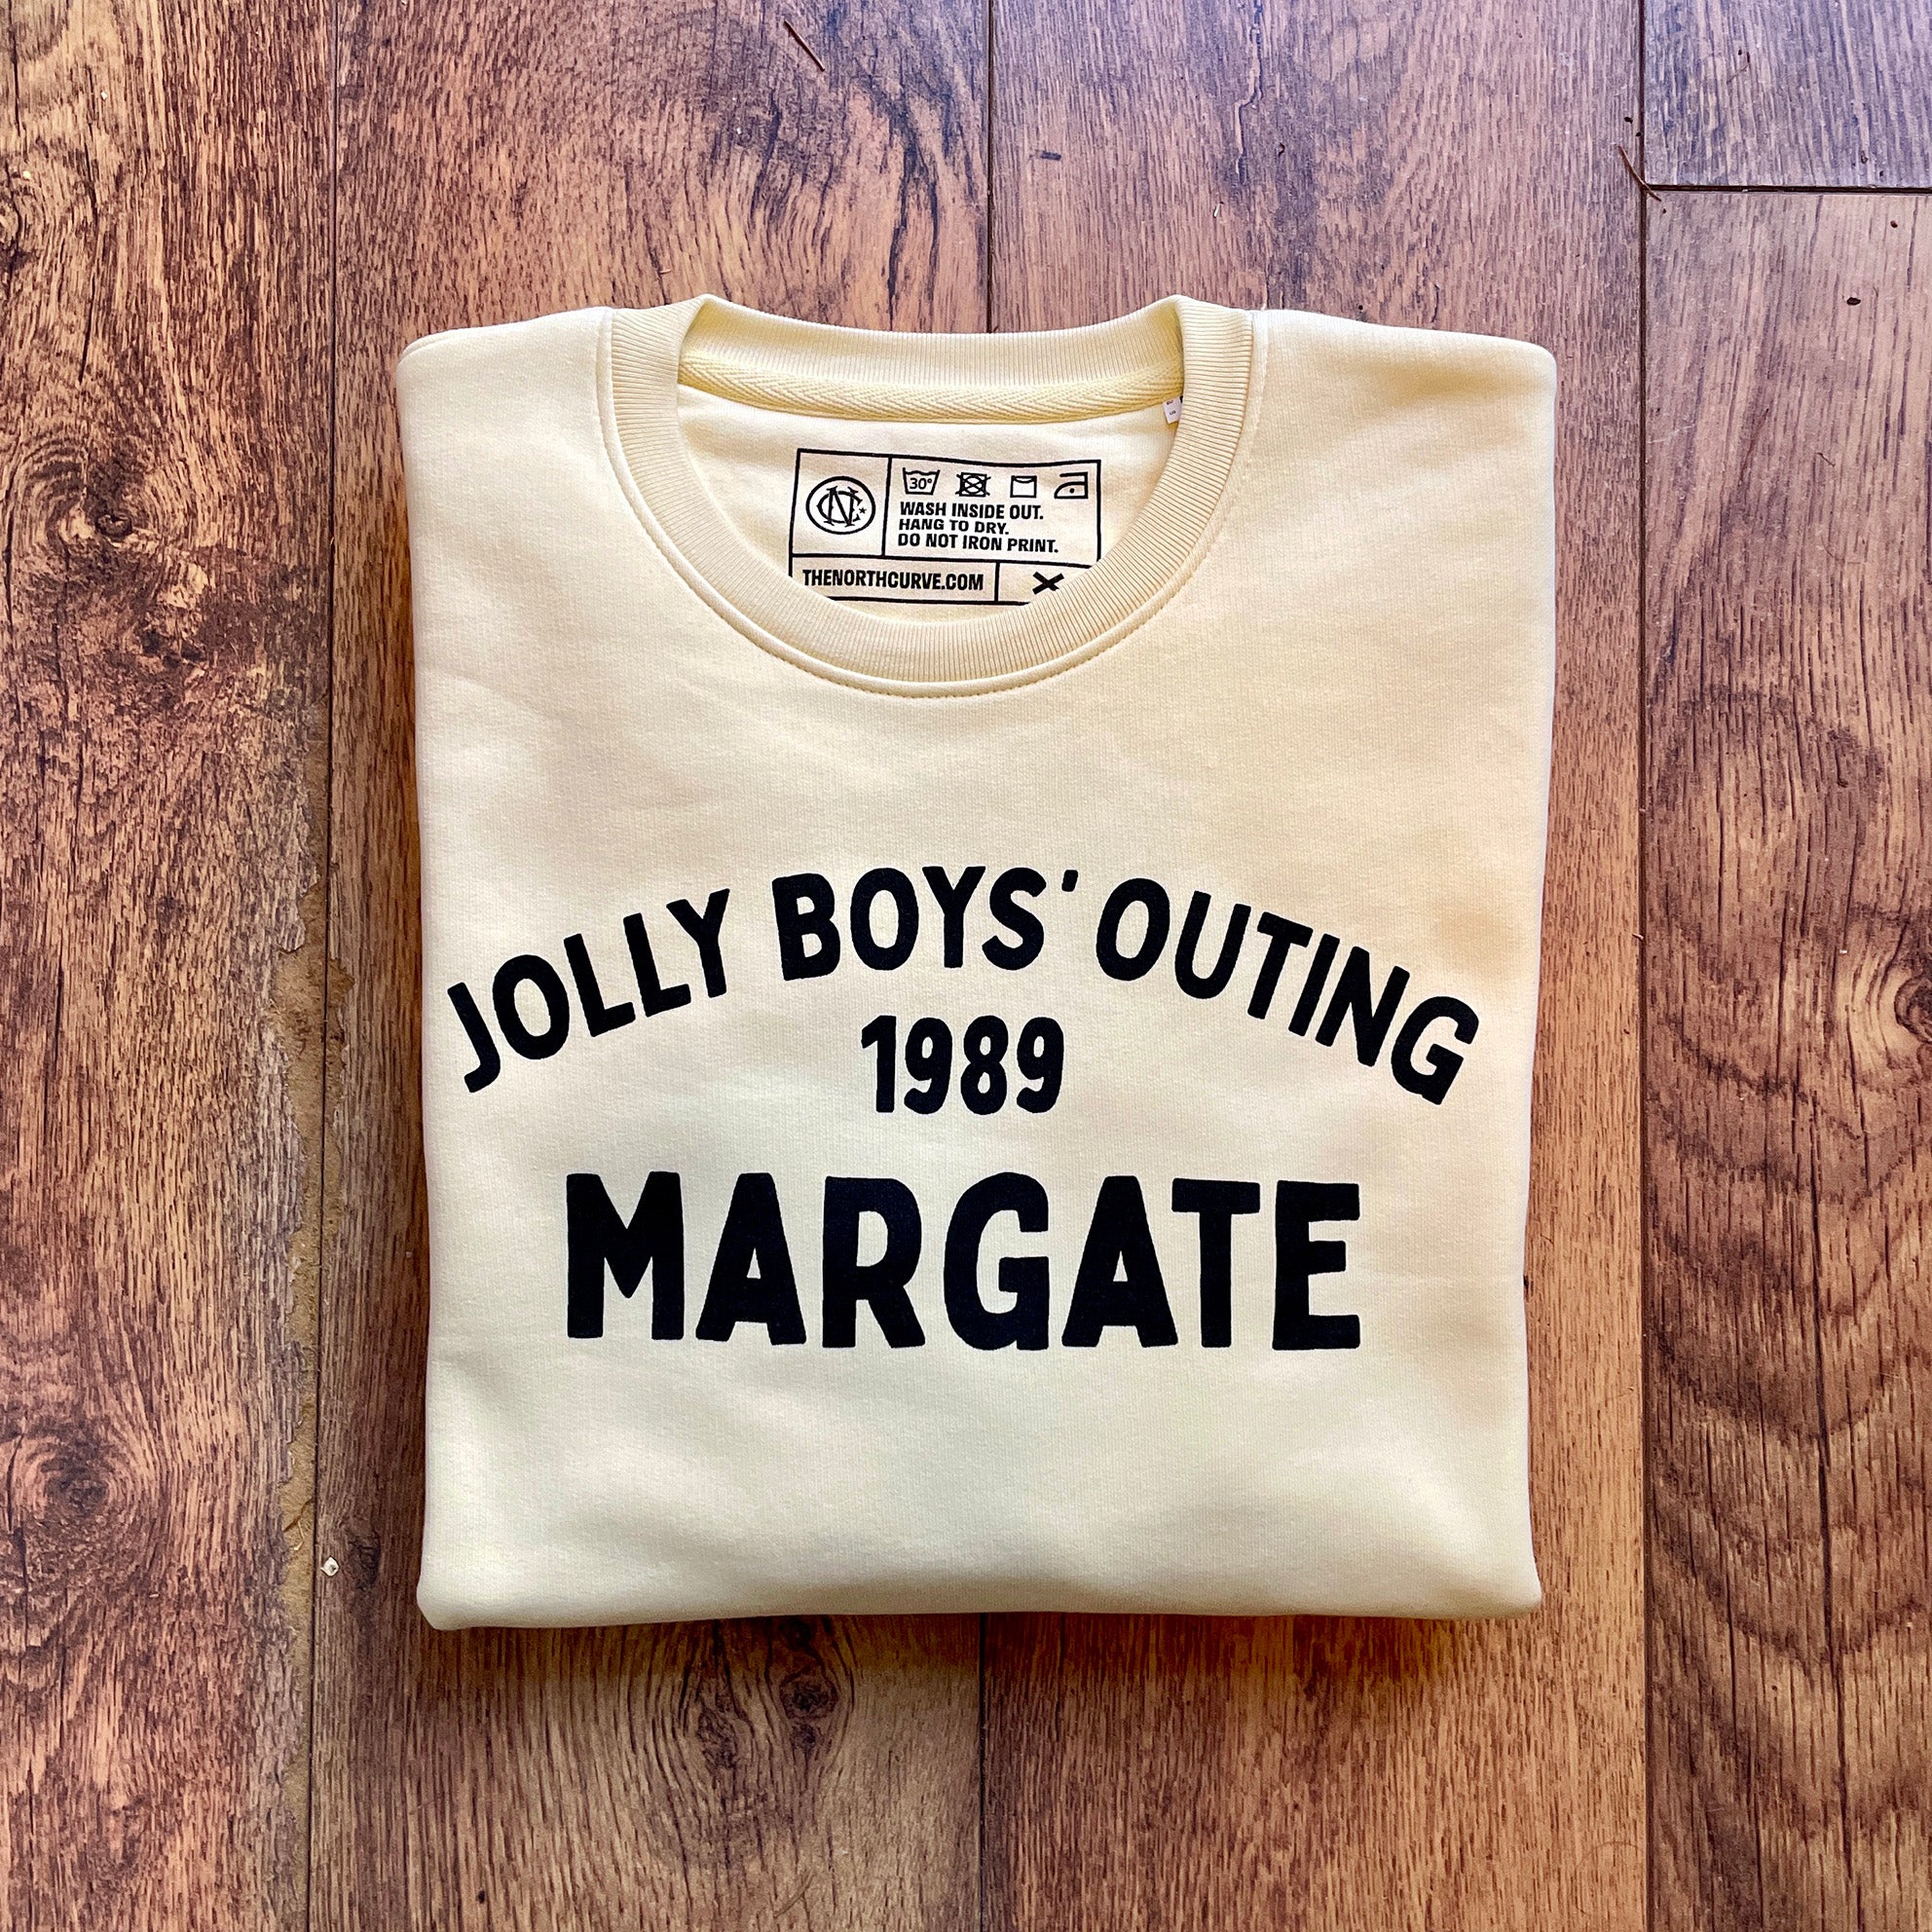 Only Fools and Horses jolly boys  t-shirt